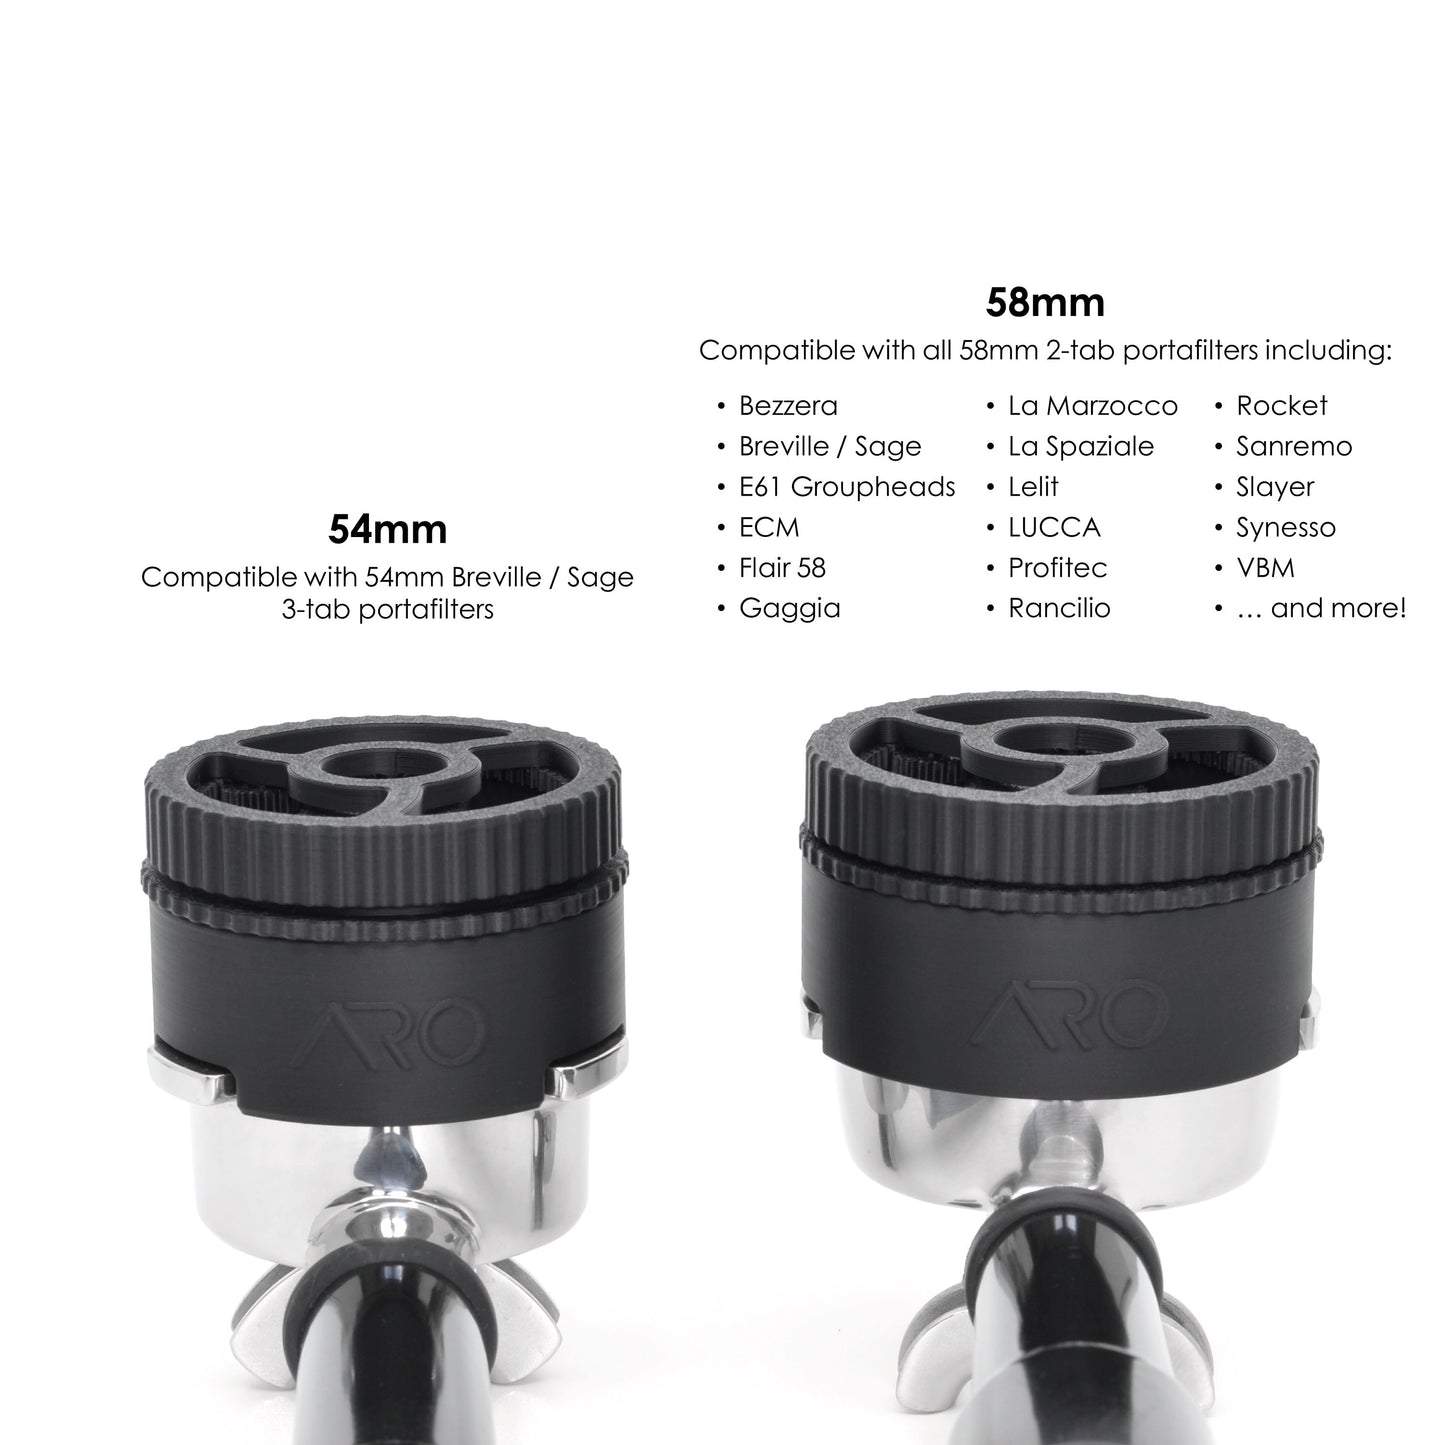 A 54mm and a 58mm portafilter each with a rotating distribution tool on top.